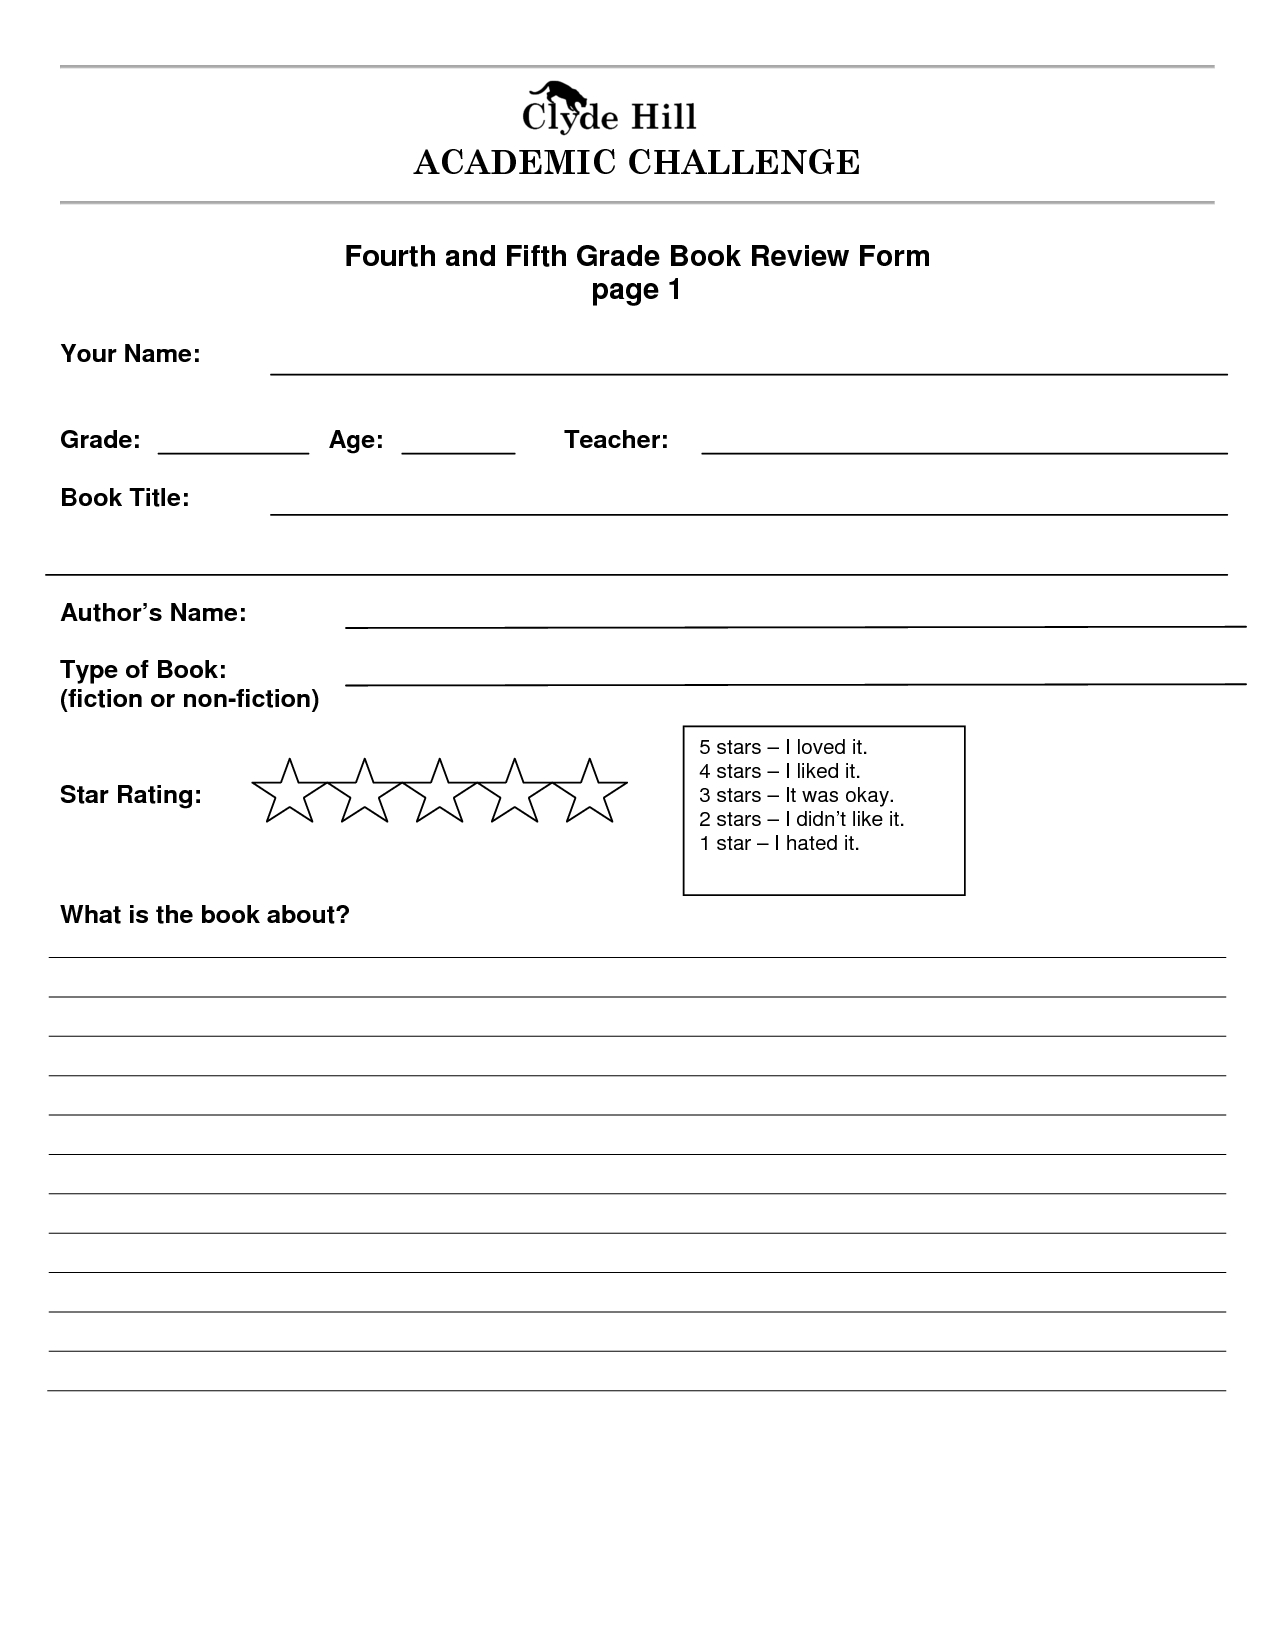 Online Essay Helper – Get Your Task Donepro Example Of A For 4Th Grade Book Report Template